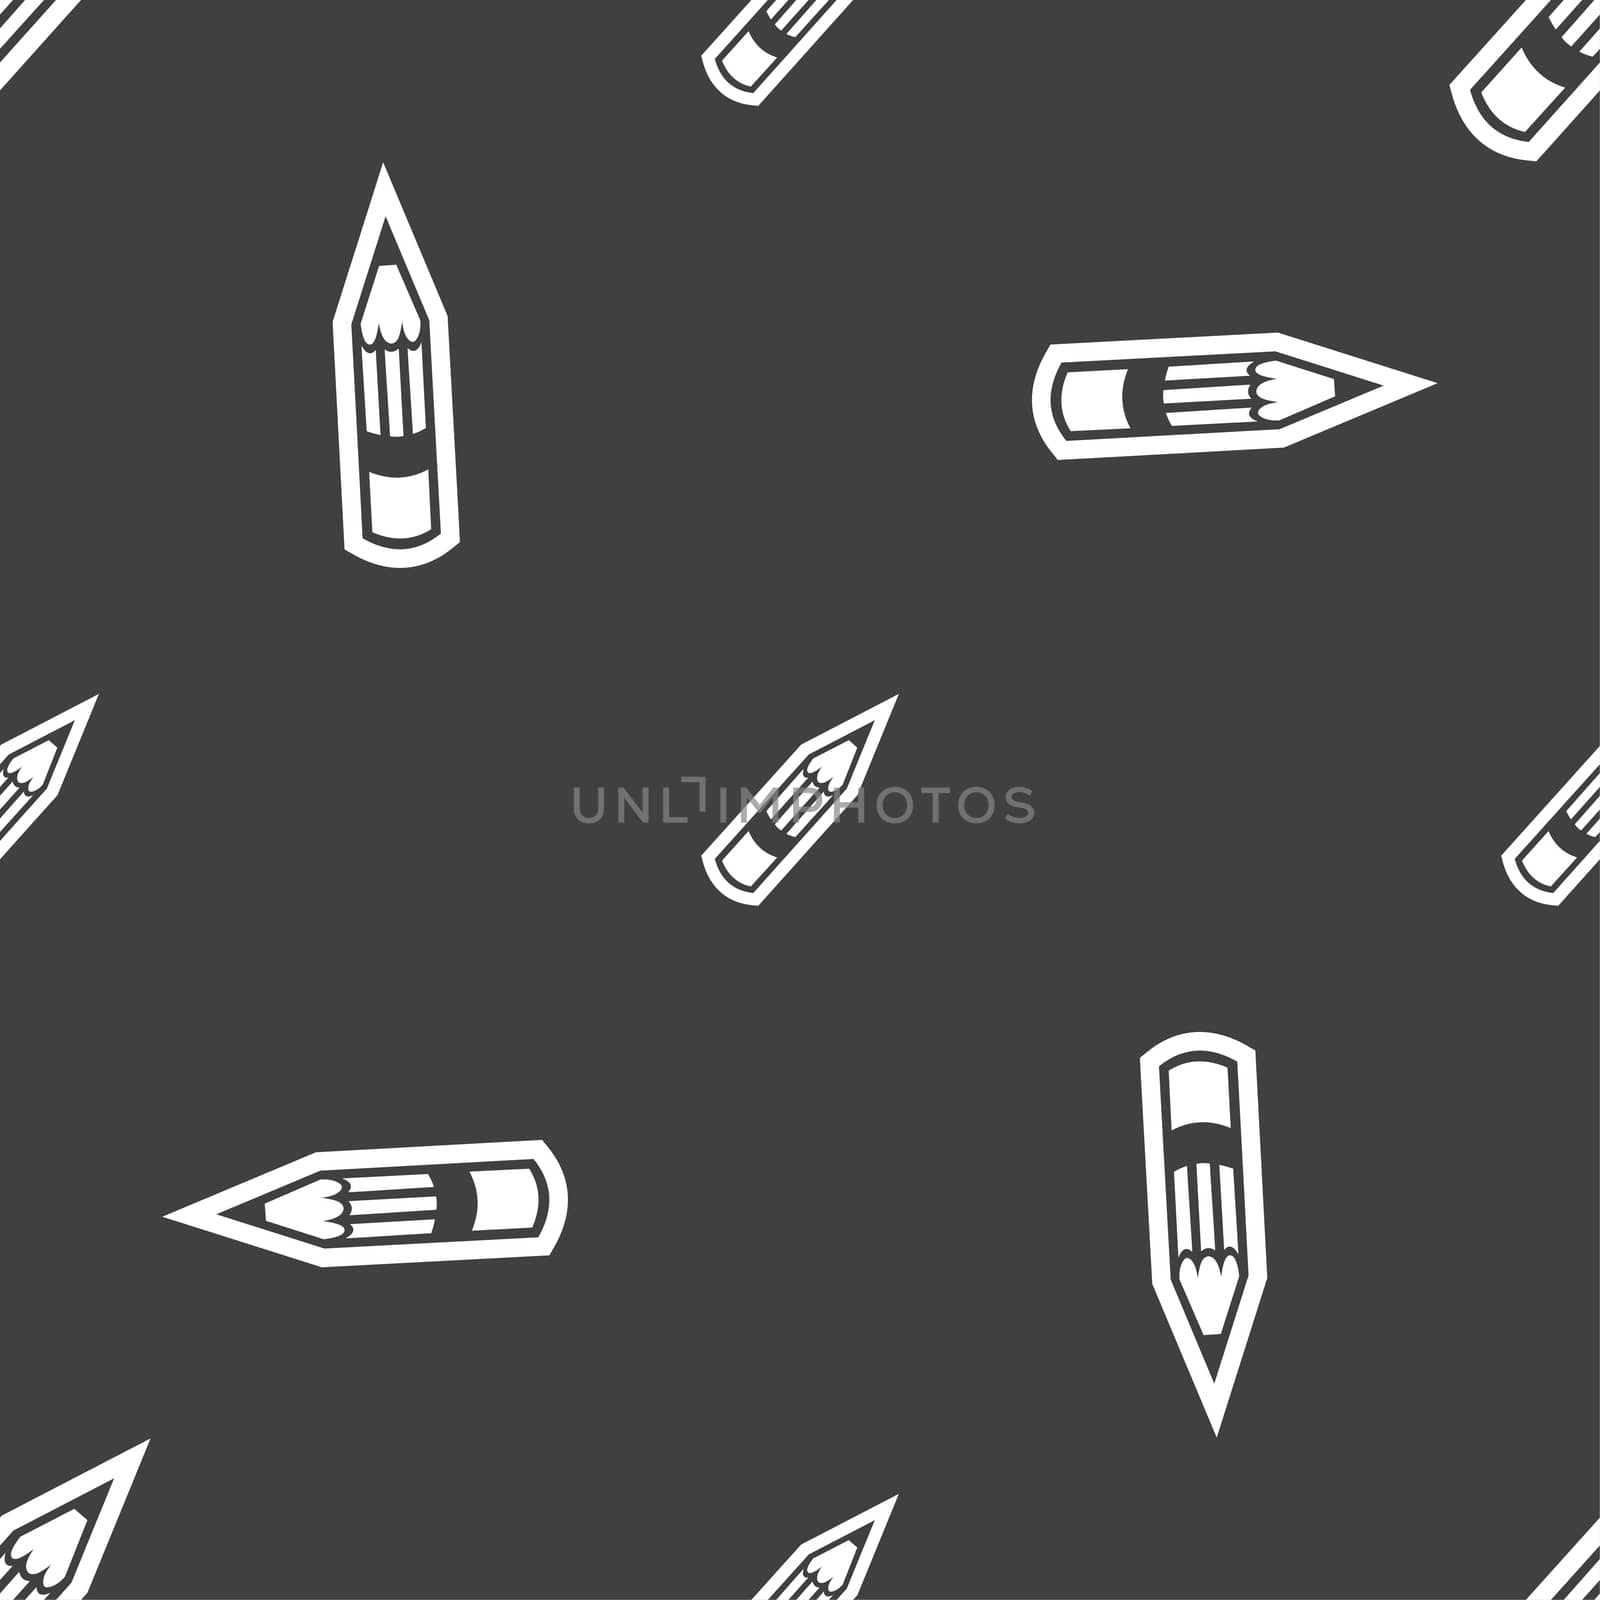 Pencil icon sign. Seamless pattern on a gray background. illustration